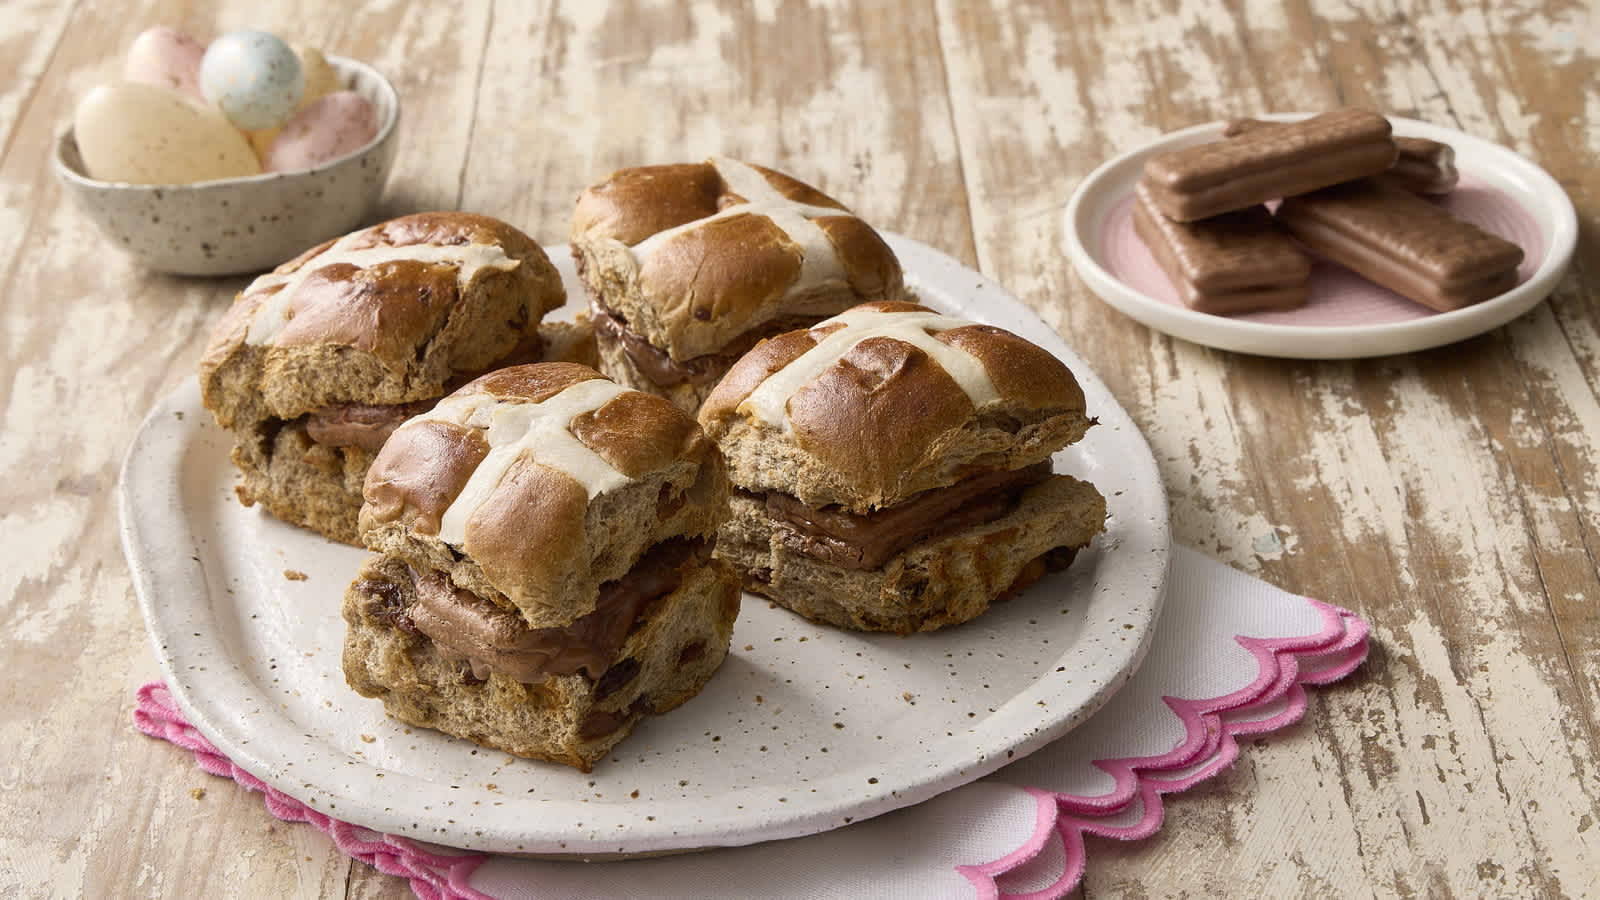 Image of Tim Tam Hot Cross Buns, with plate of Tim Tams